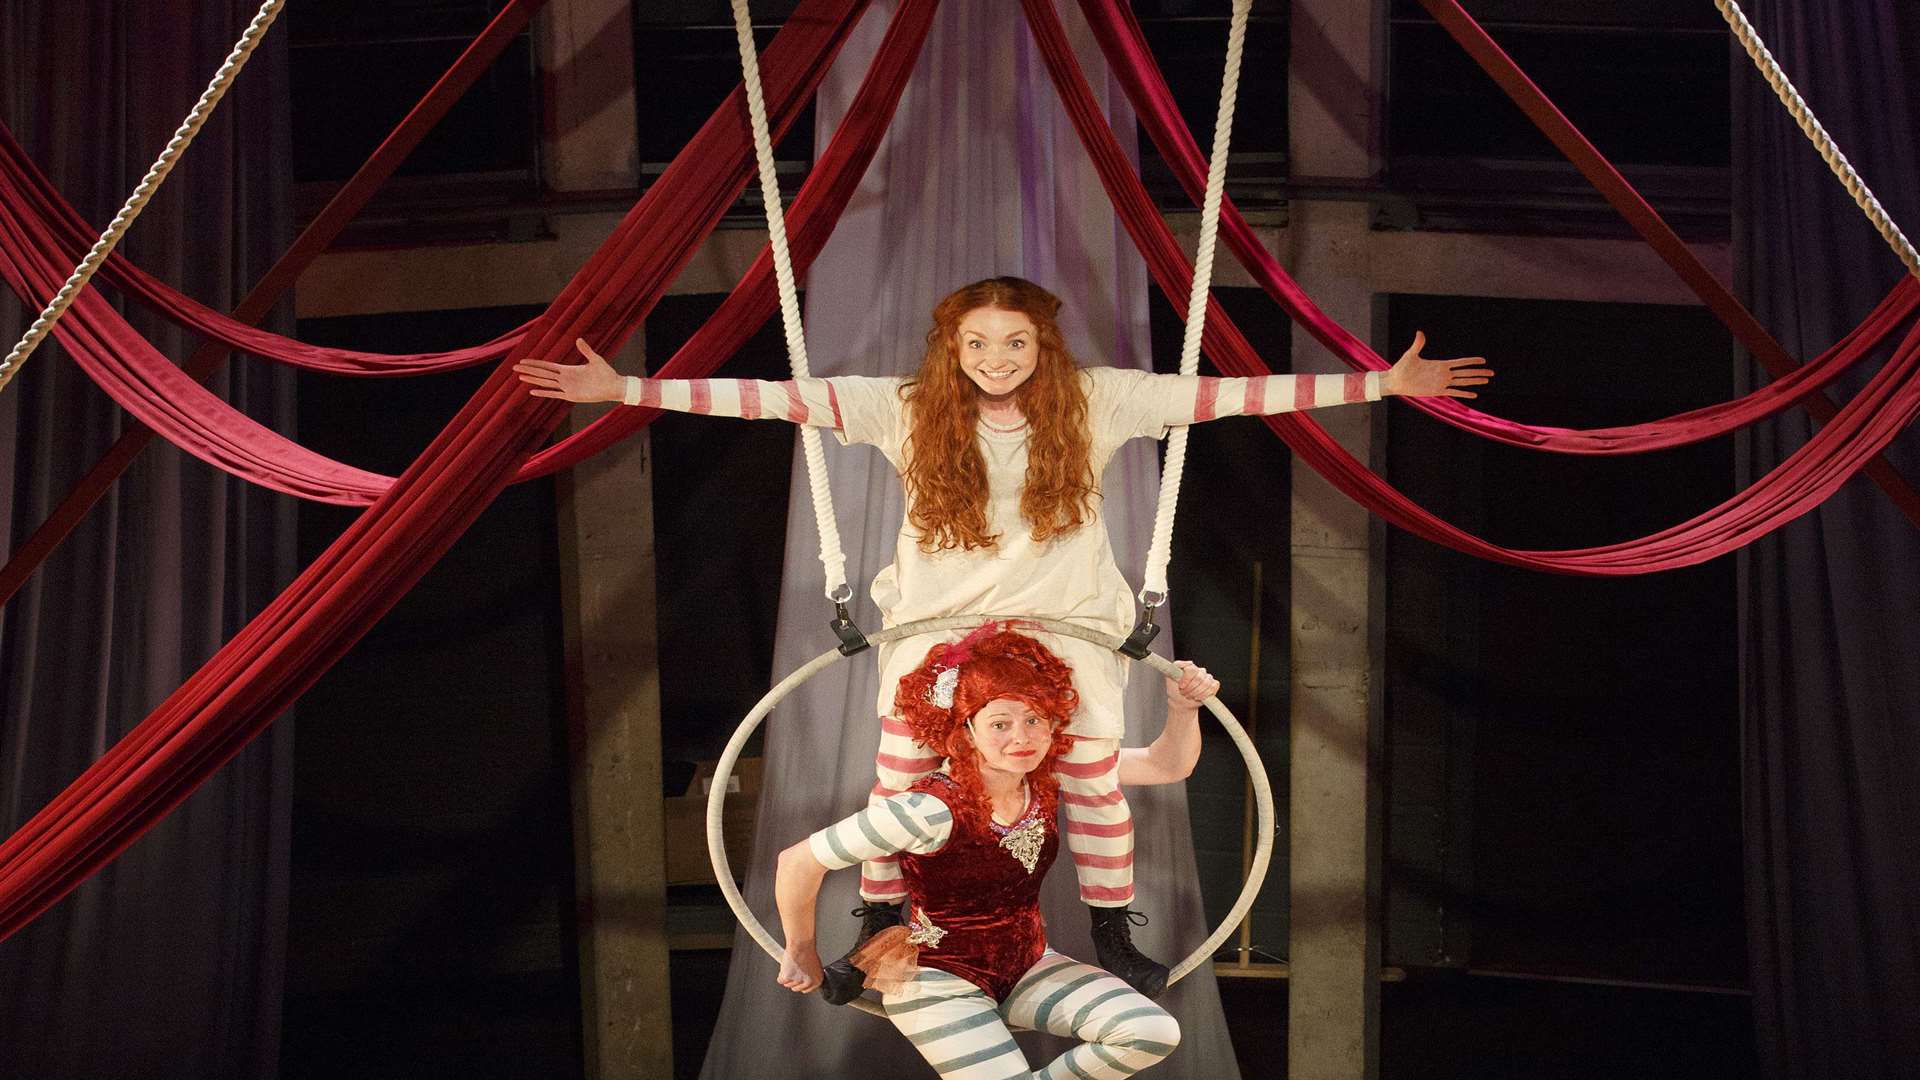 Hetty Feather by Jacqueline Wilson has been adapted for the stage by Emma Reeves